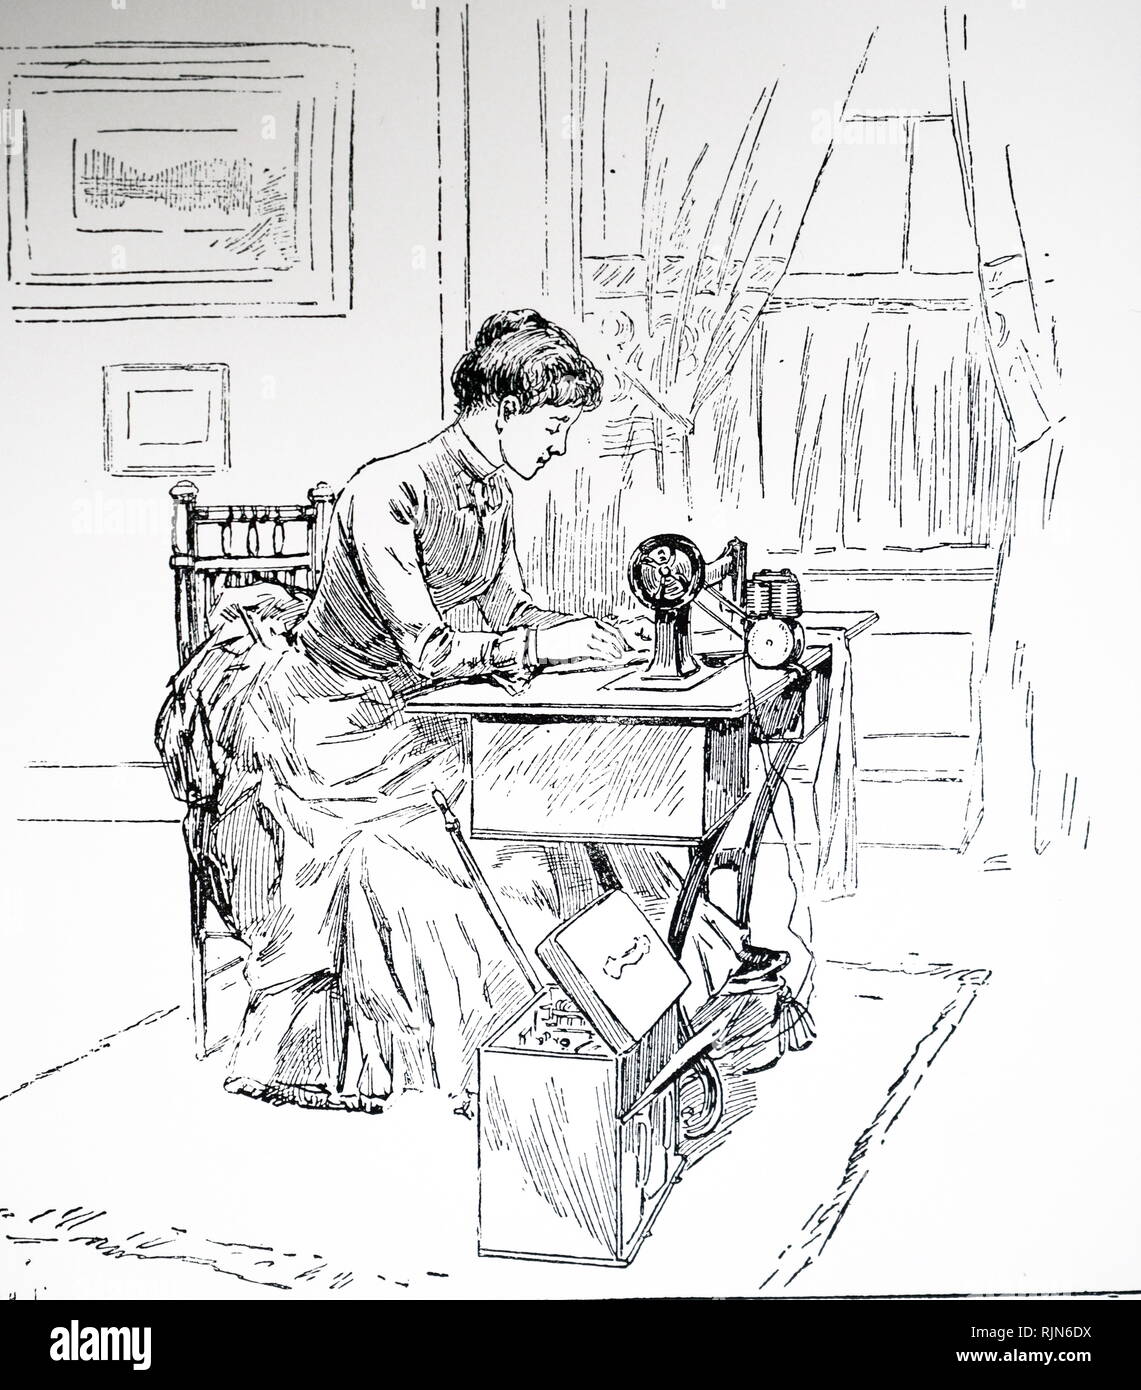 Illustration showing Lady using a battery-powered electric sewing machine. 1888 Stock Photo